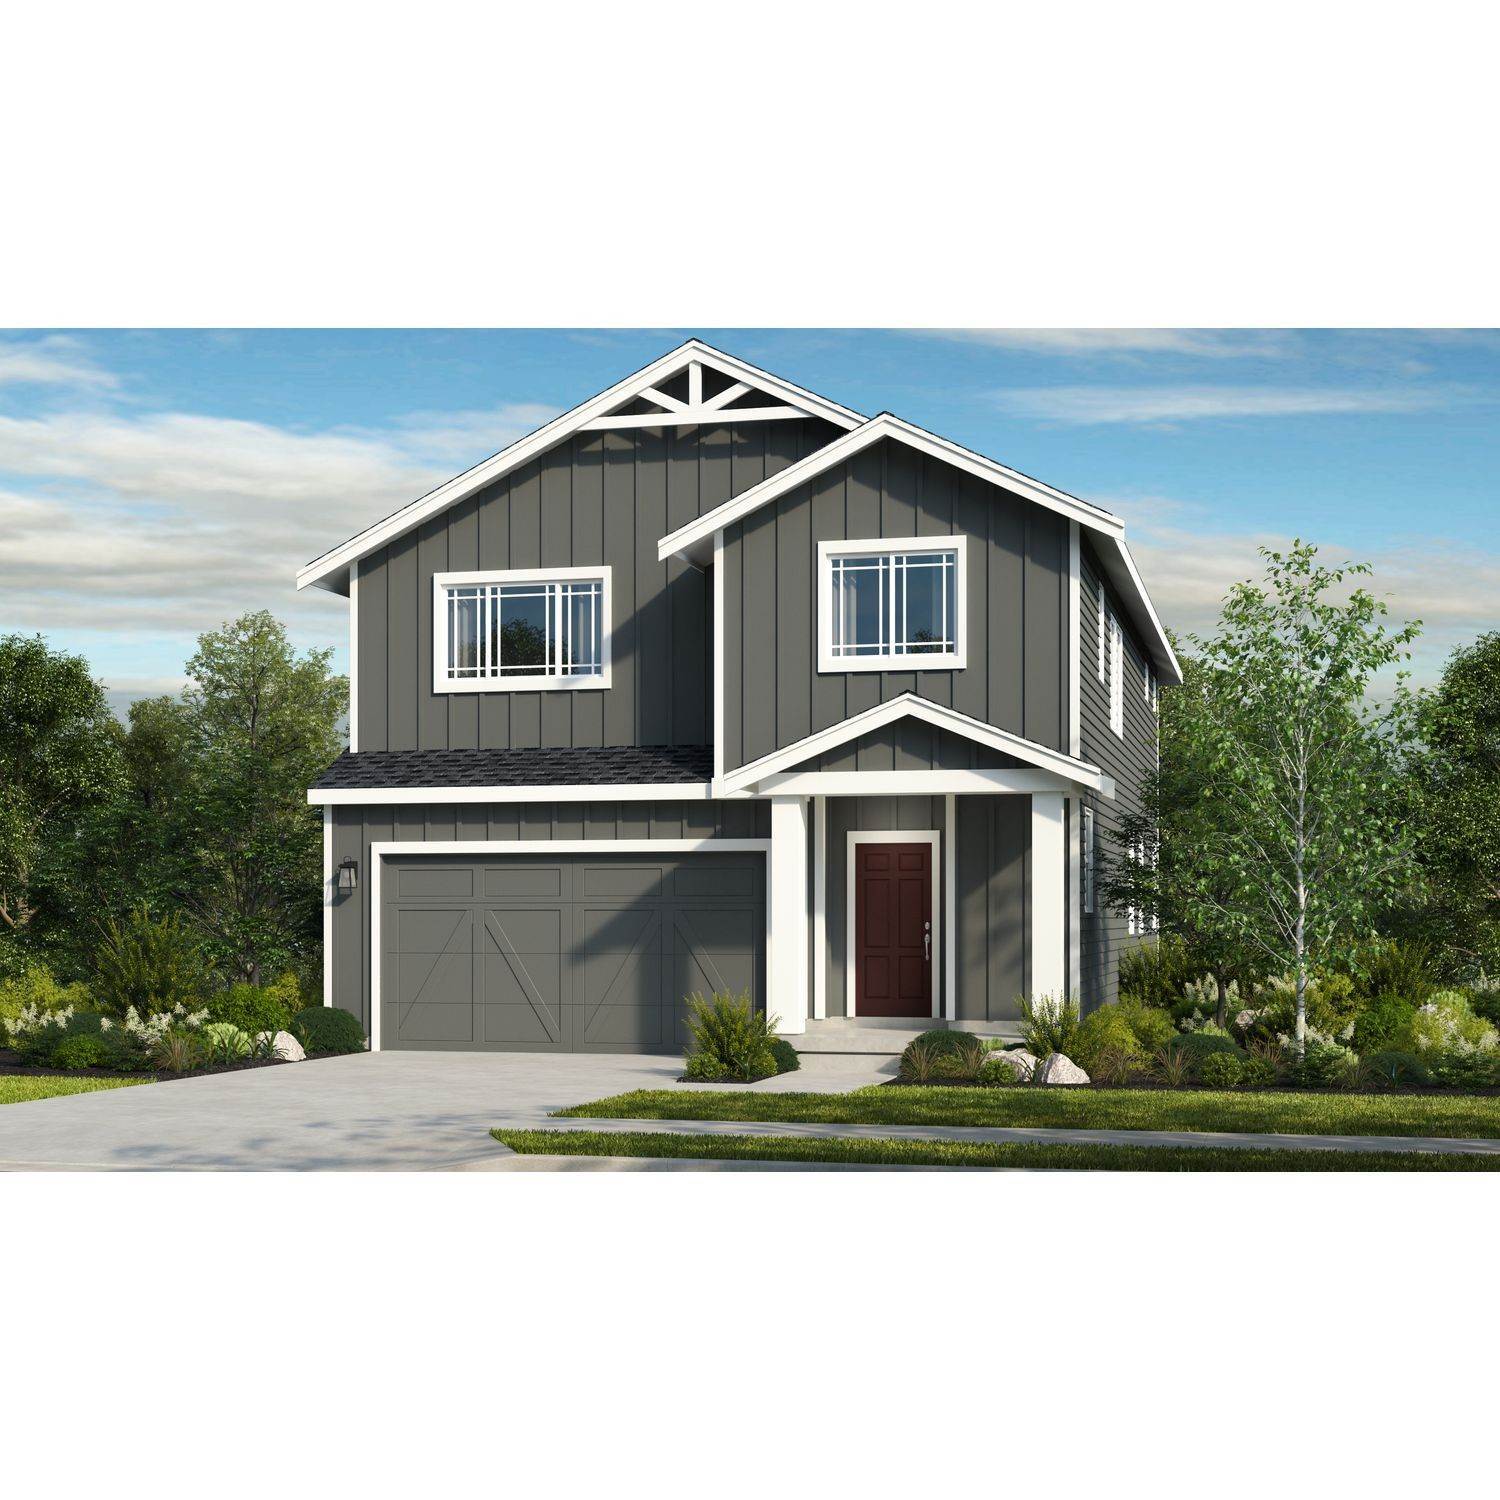 Single Family for Sale at Tigard, OR 97224